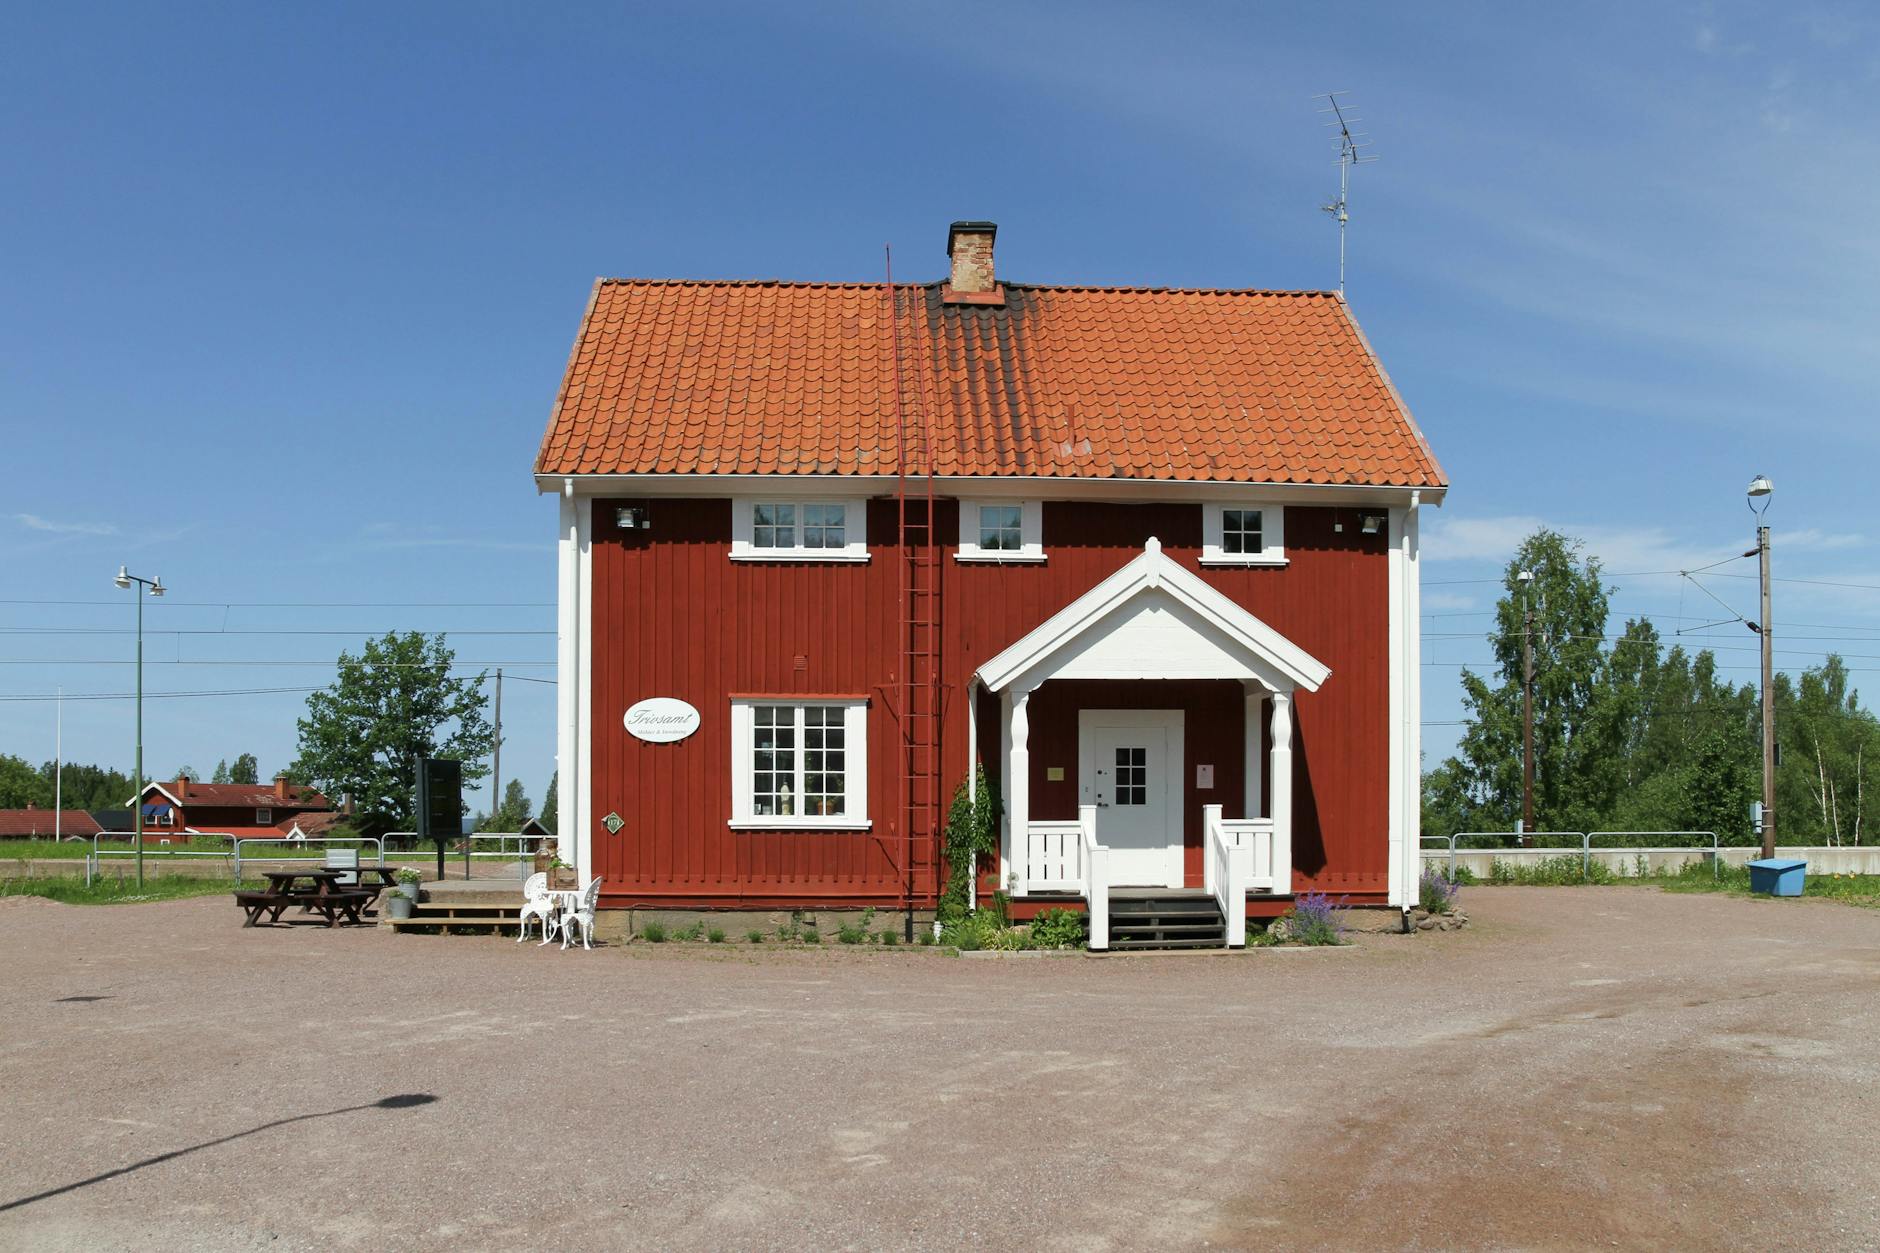 Red and White Wooden House Near Green Trees Under Blue Sky